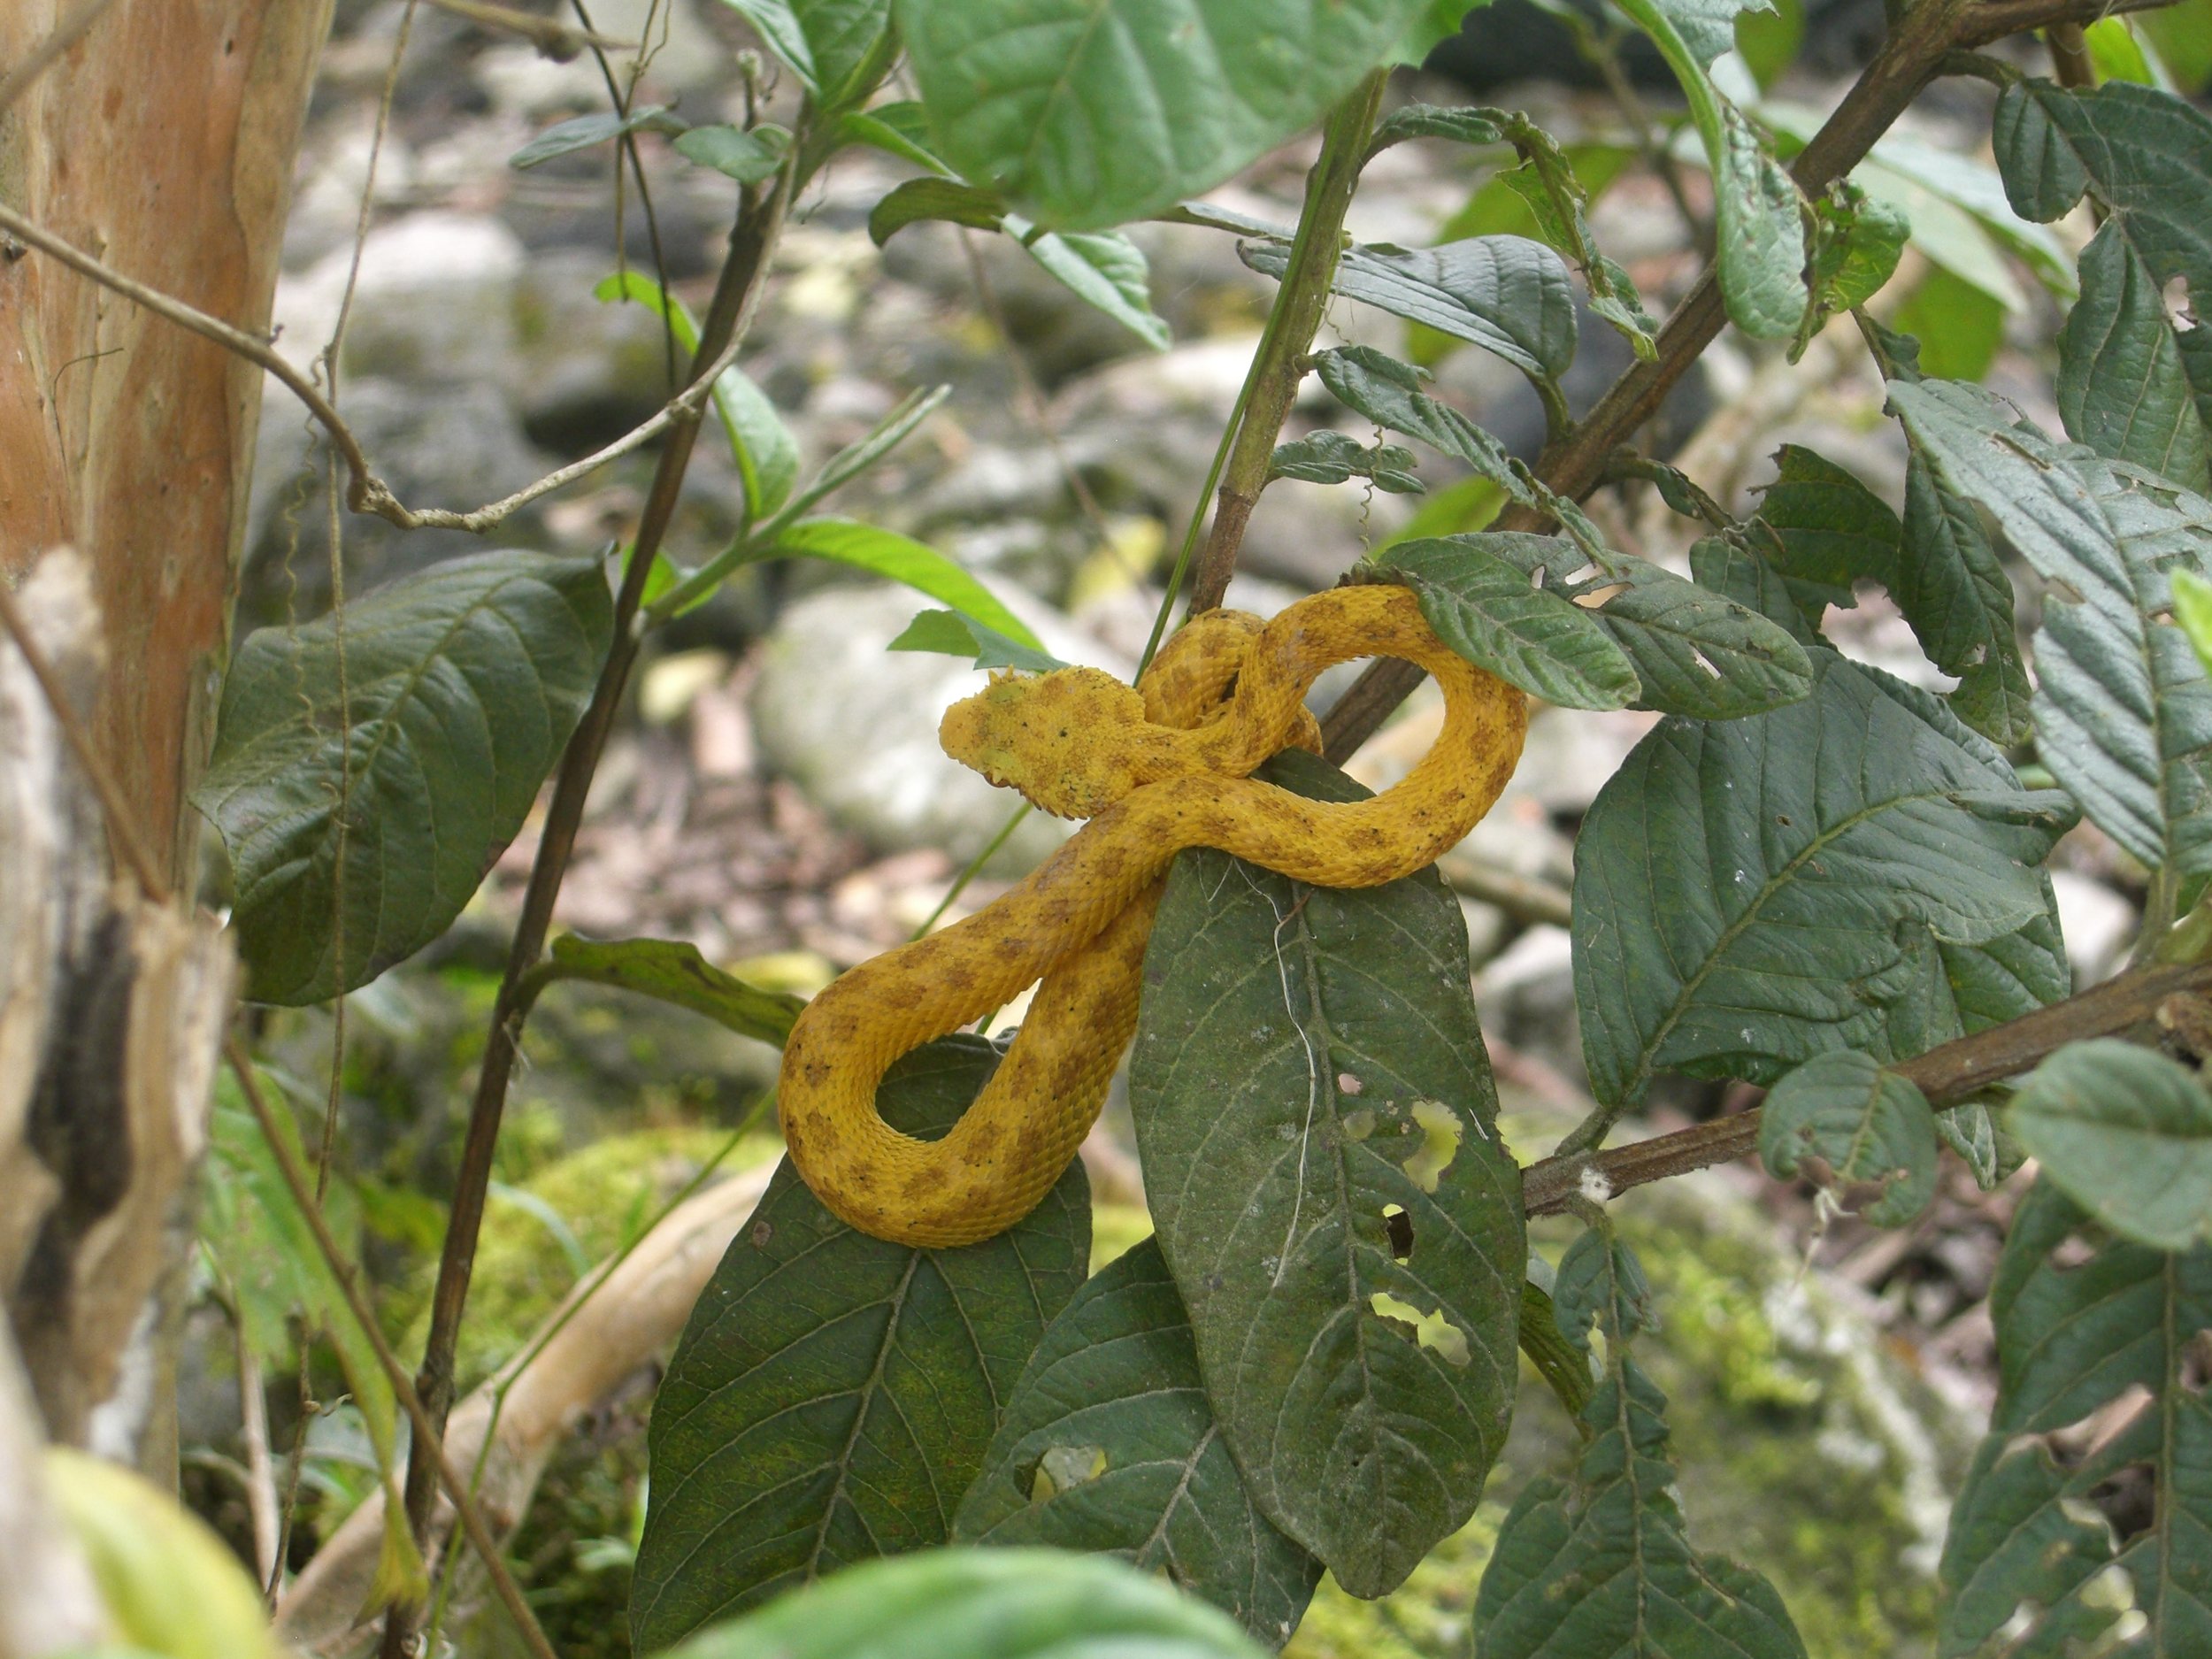  Wandering around cacao farms can be dangerous, especially when extremely poisonous vipers are hanging out. 